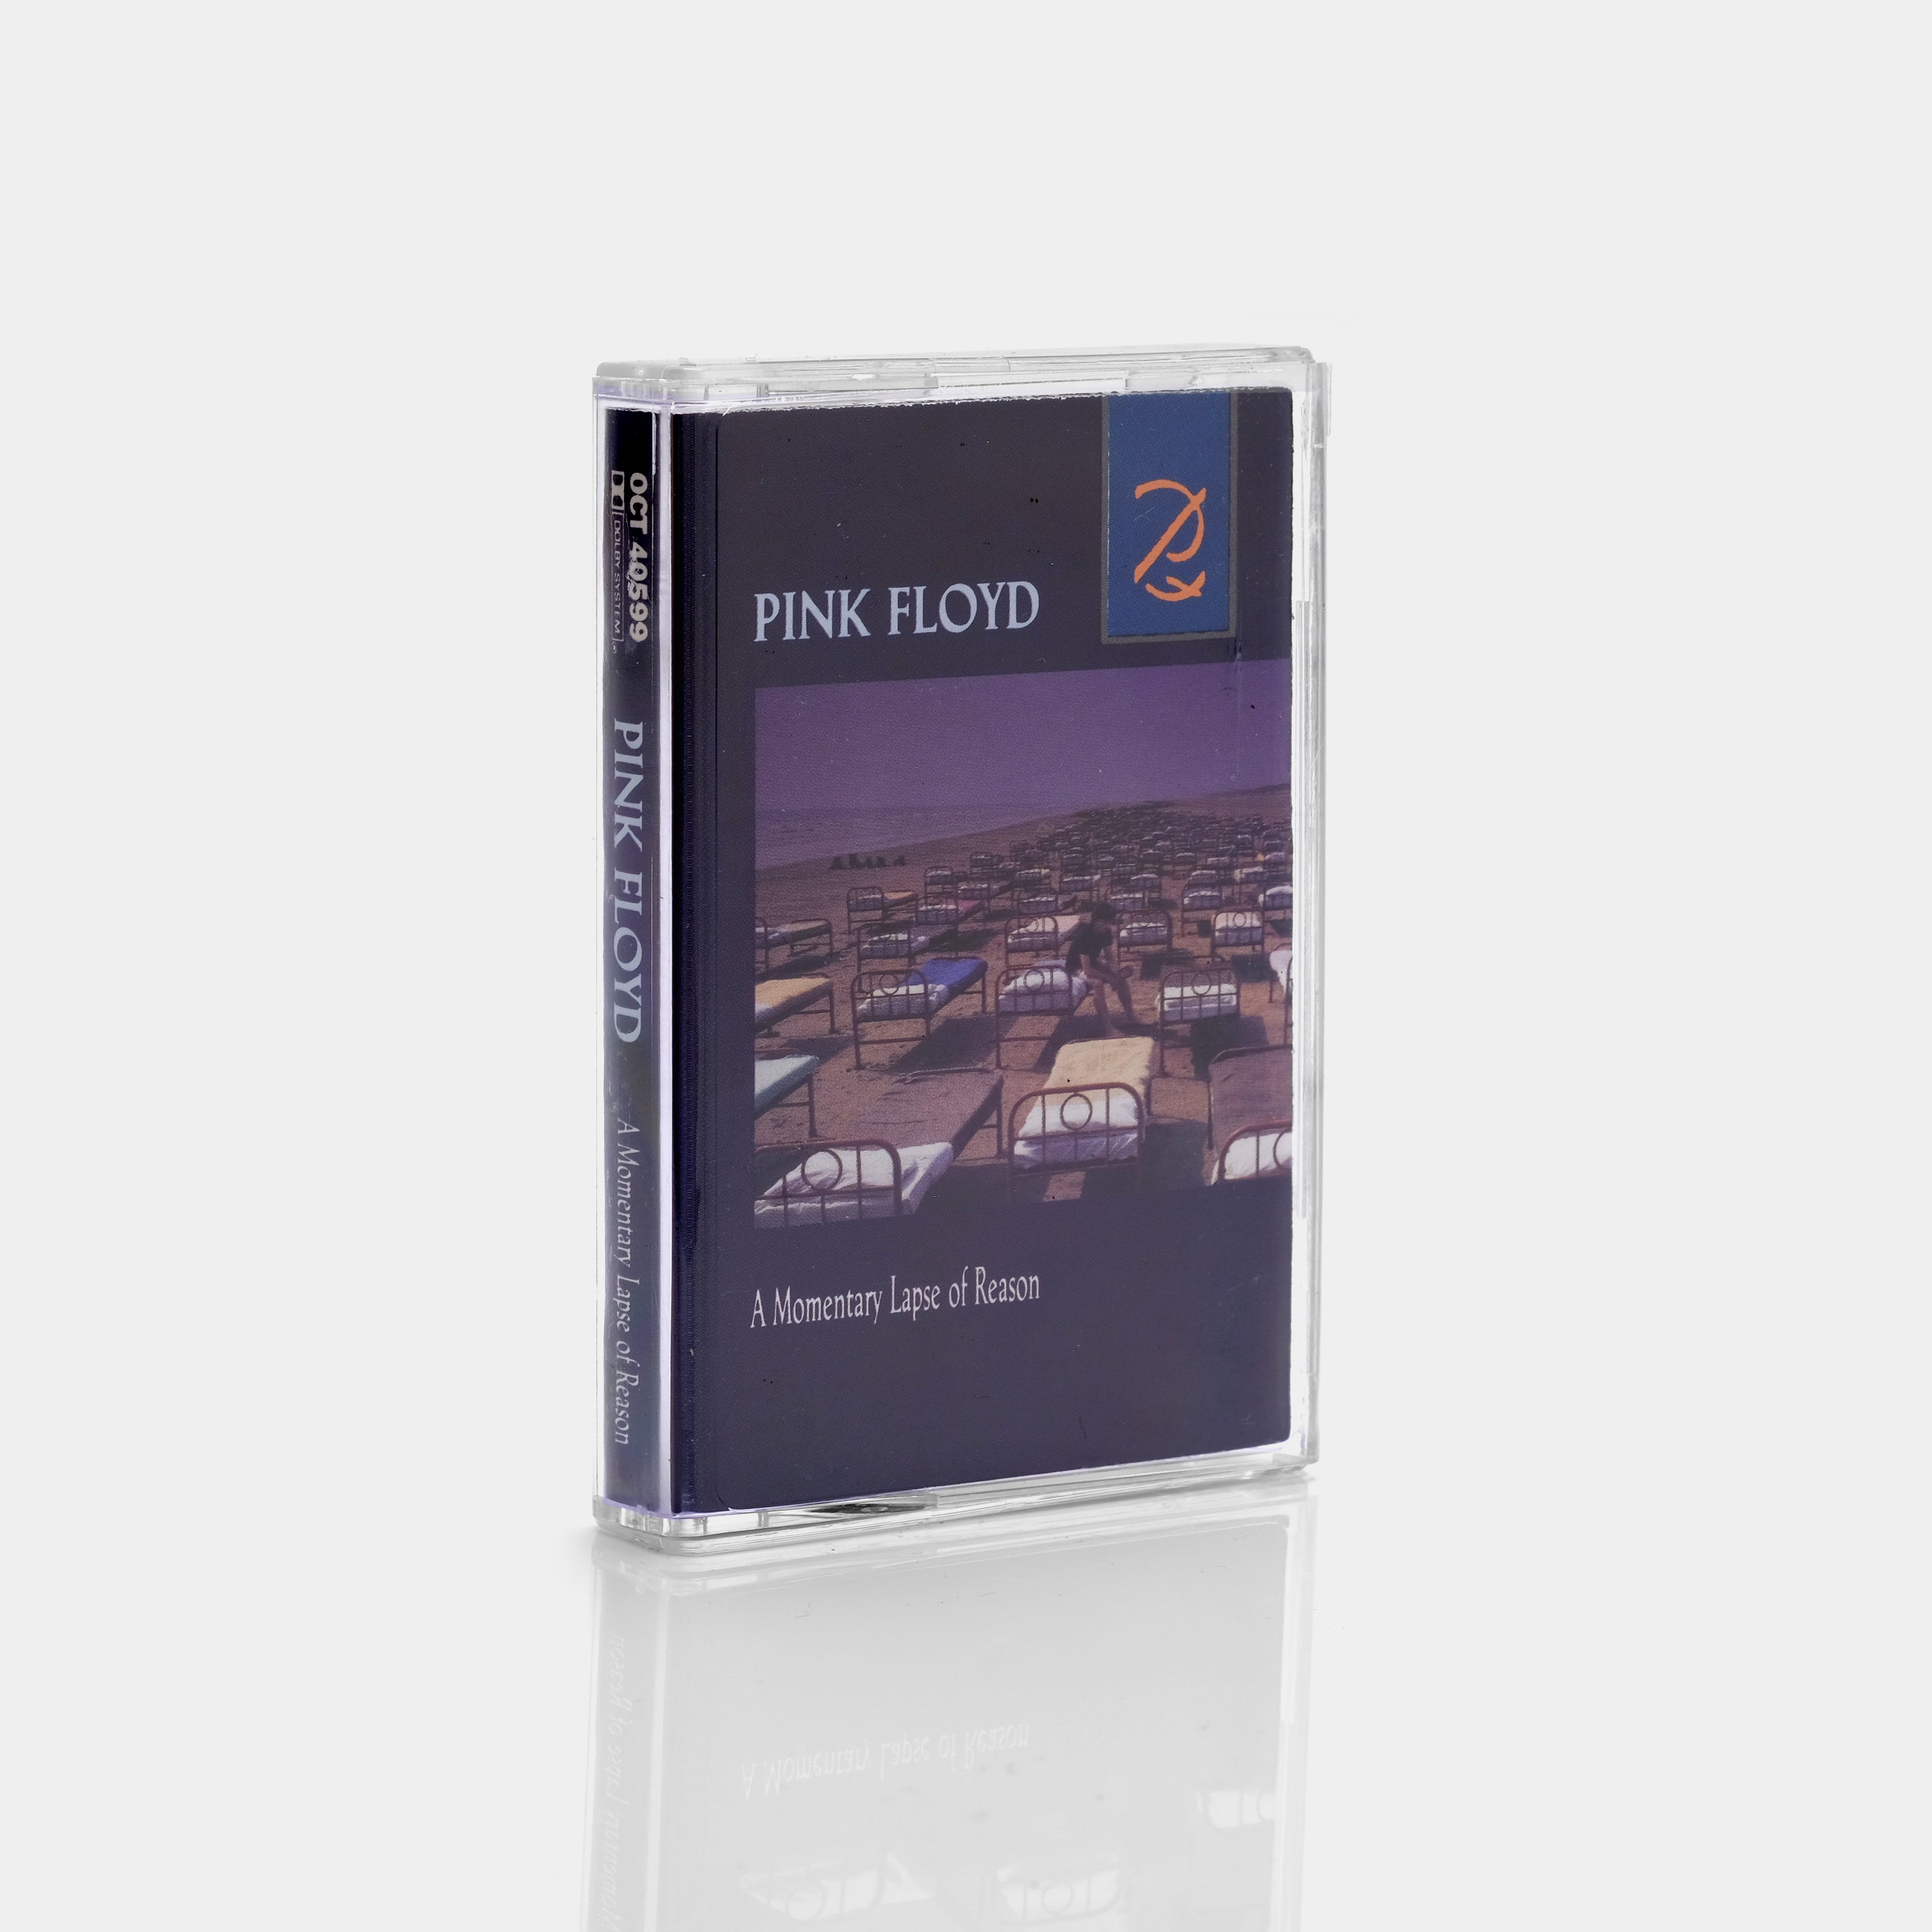 Pink Floyd - A Momentary Lapse of Reason Cassette Tape